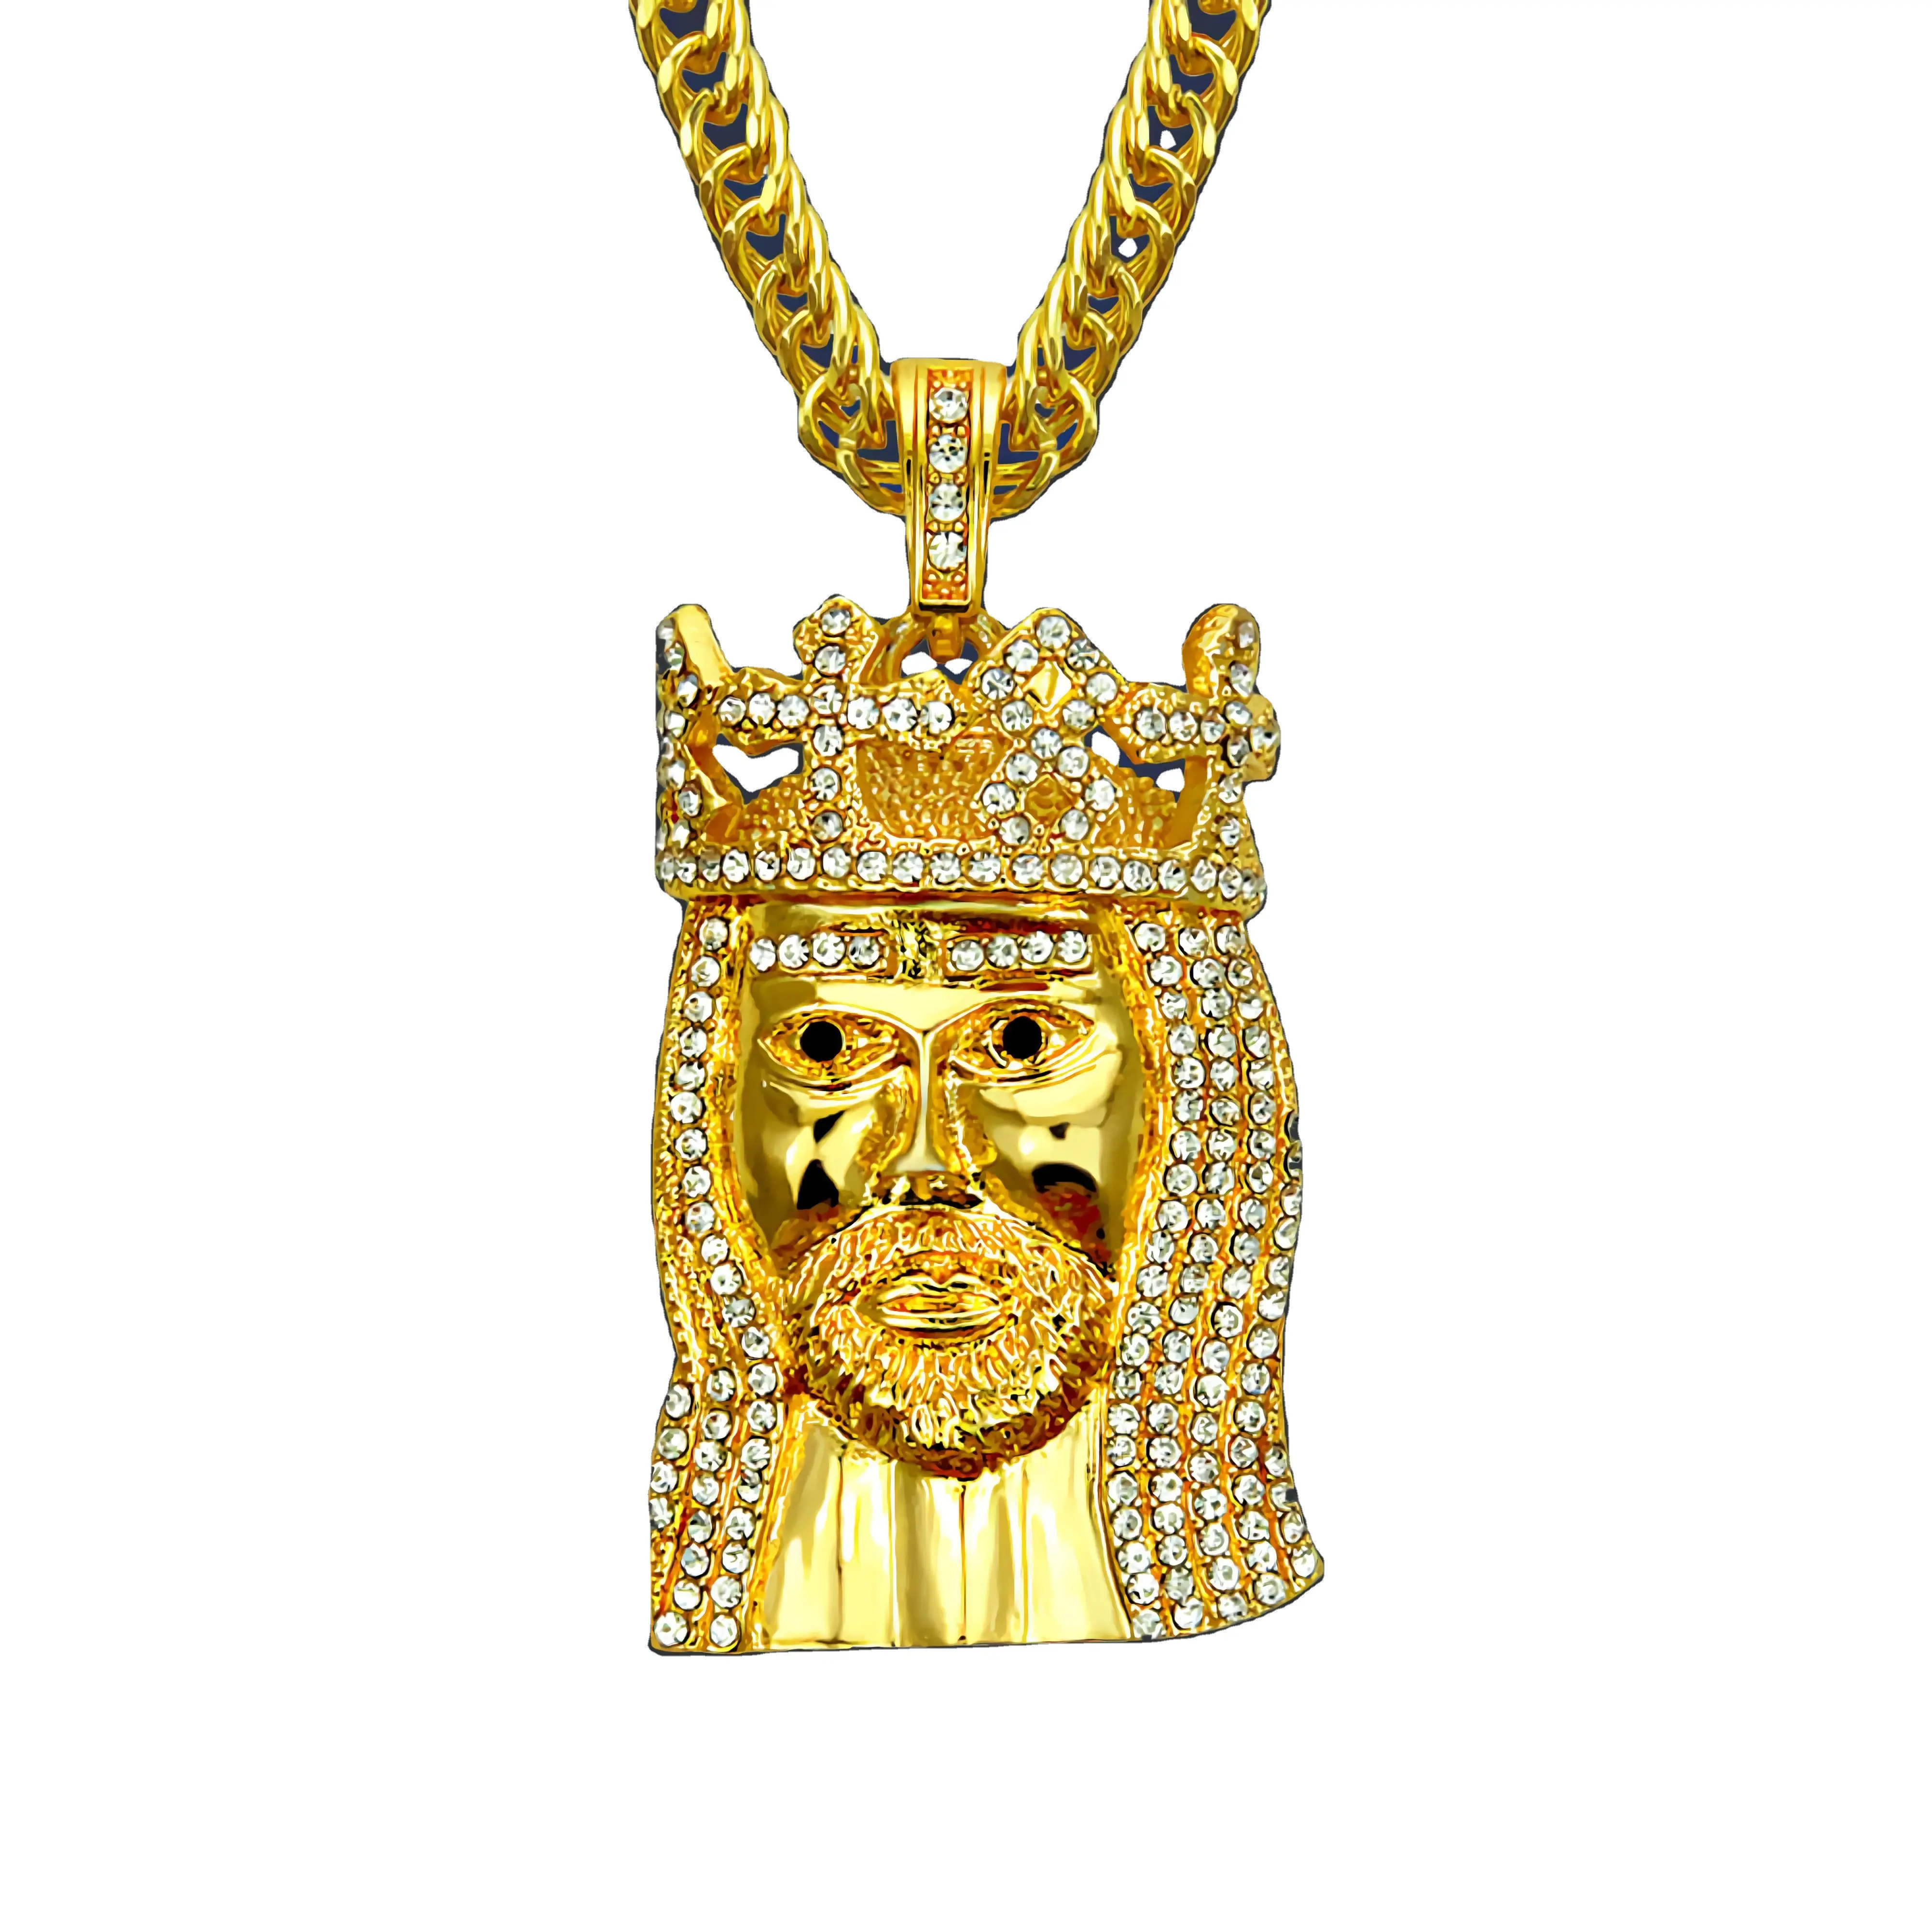 DUYIZHAO Hip Hop Pendant Jewelry with Chain Personality Crown Jewelry People Head Iced Out Pendant Necklace Bling Bling Jewelry